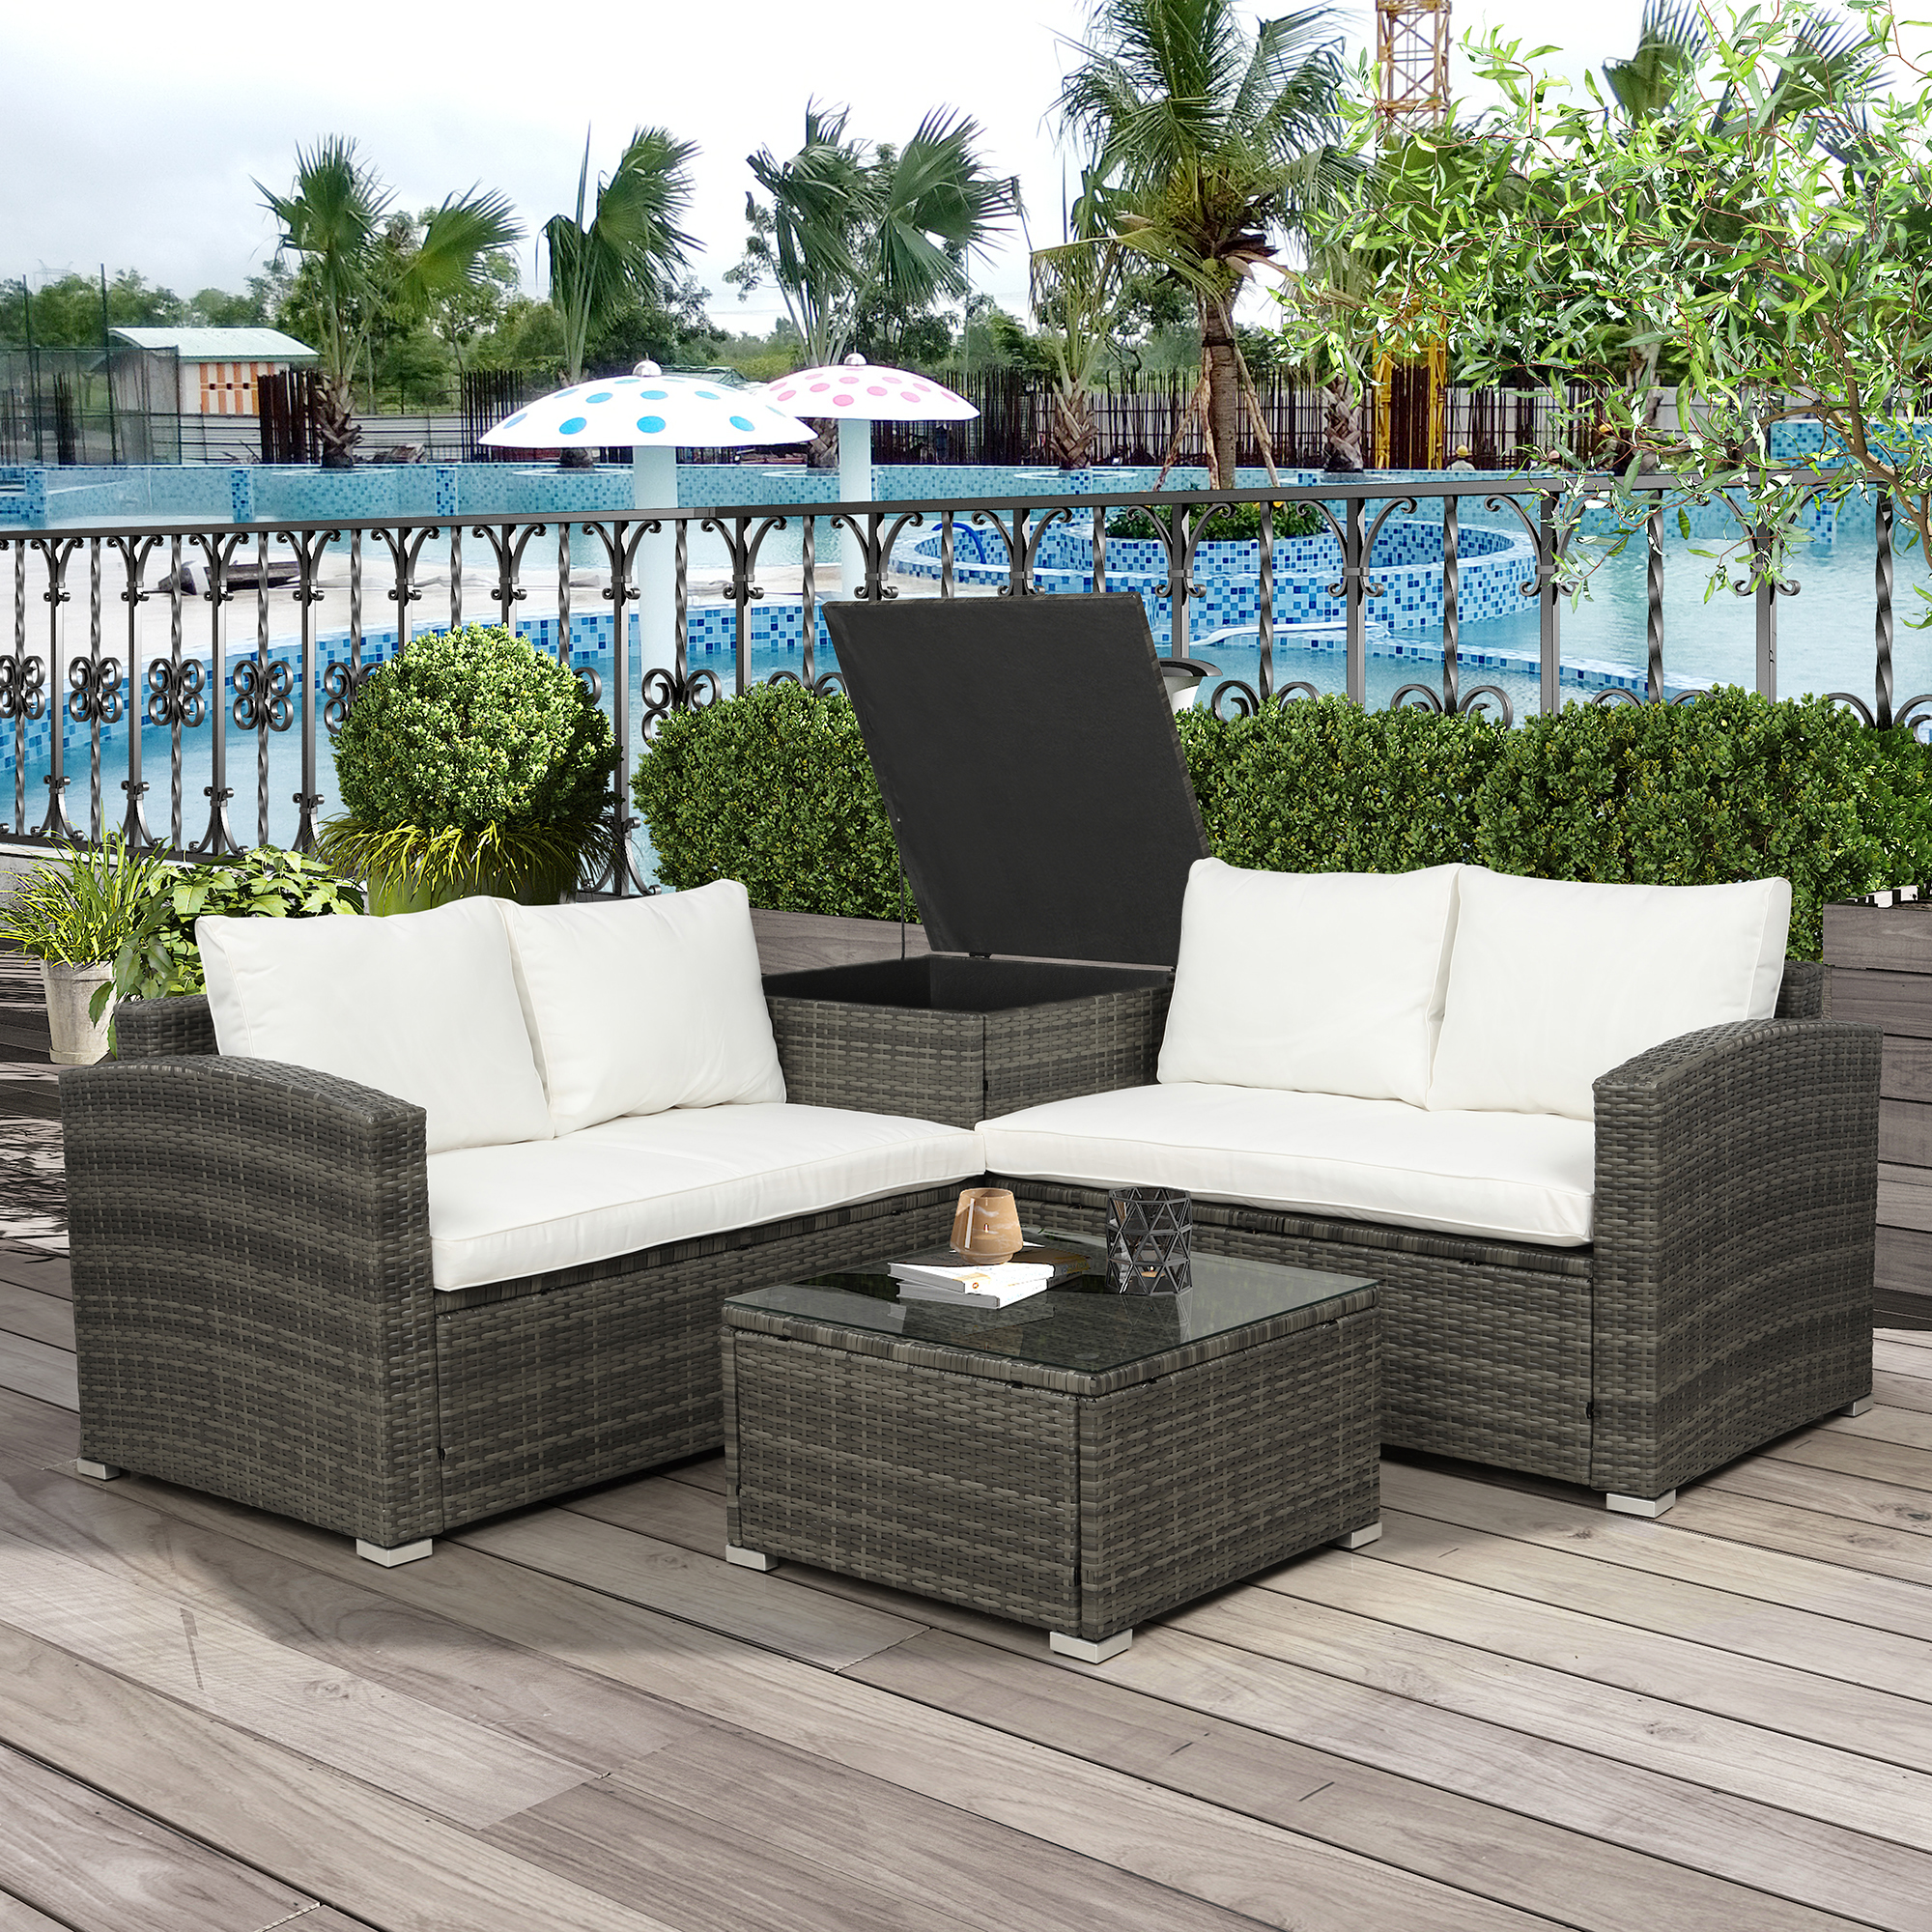 enyopro Outdoor Wicker Patio Furniture Sets, 4 Piece Outdoor Conversation Set with Storage Box and Coffee Table, Rattan Outside Furniture Set, Patio Backyard Porch Balcony Furniture Sets, JA1740 - image 3 of 9